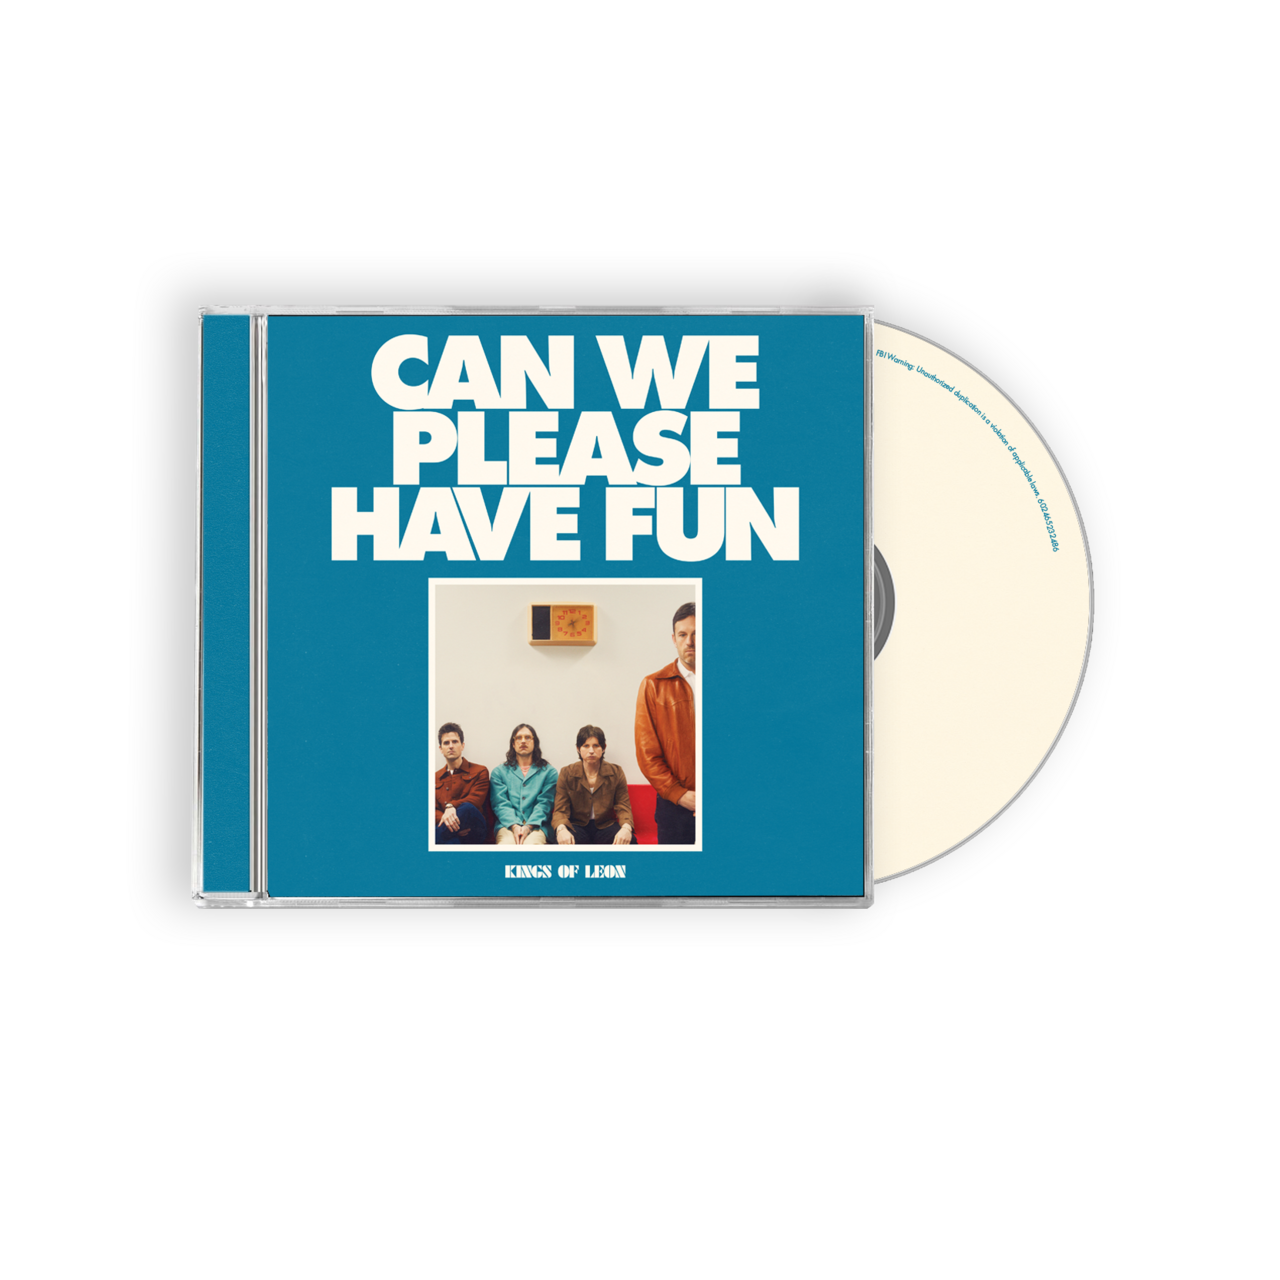 Can We Please Have Fun: Exclusive Green Vinyl LP, CD + Signed Art Card